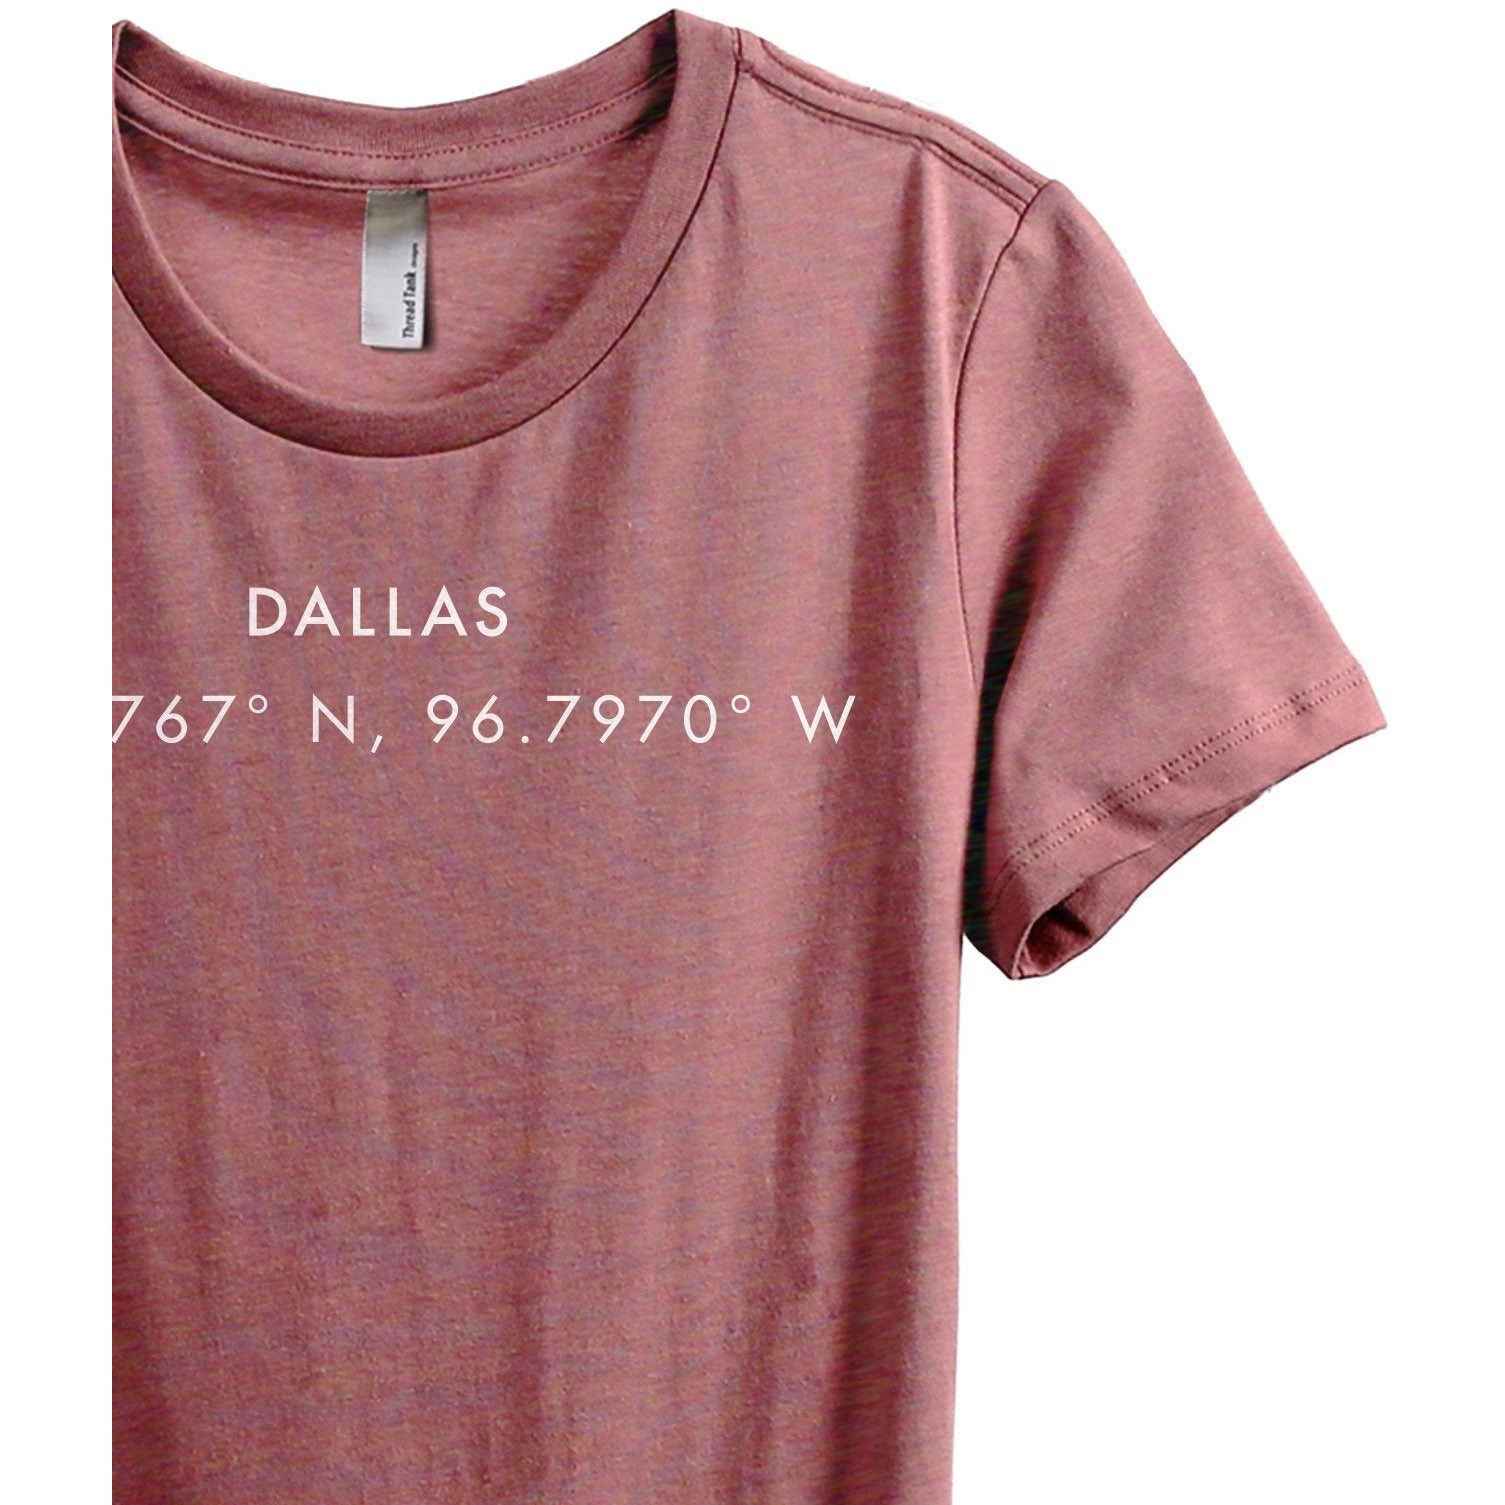 Dallas Texas Coordinates Women's Relaxed Crewneck T-Shirt Top Tee Heather Rouge Zoom Details
